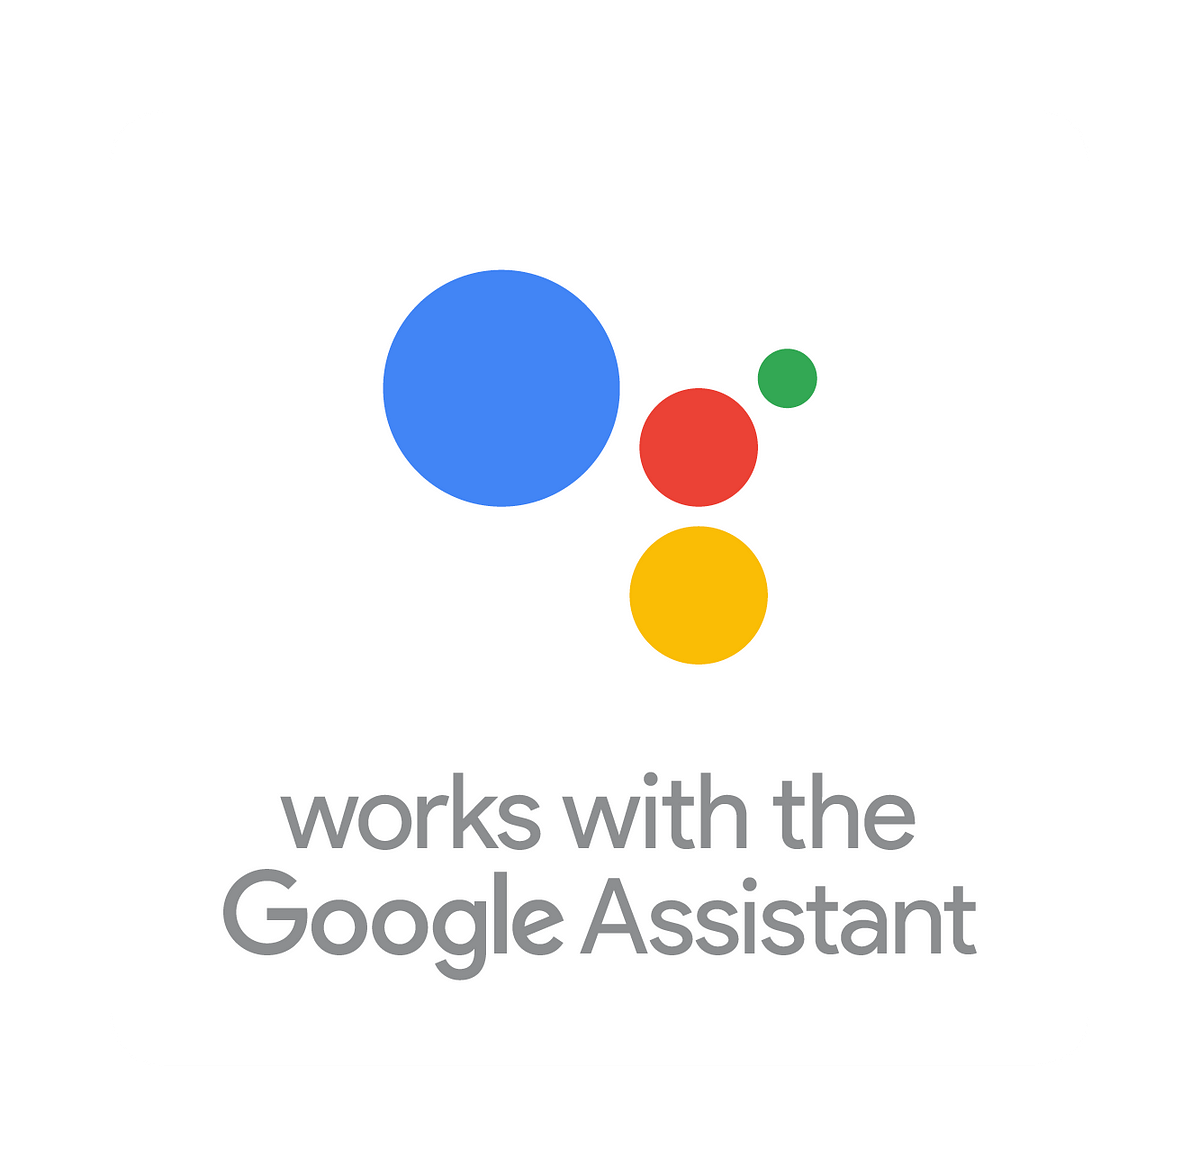 Google Assistant on Web. I'm proud to announce, that we've made